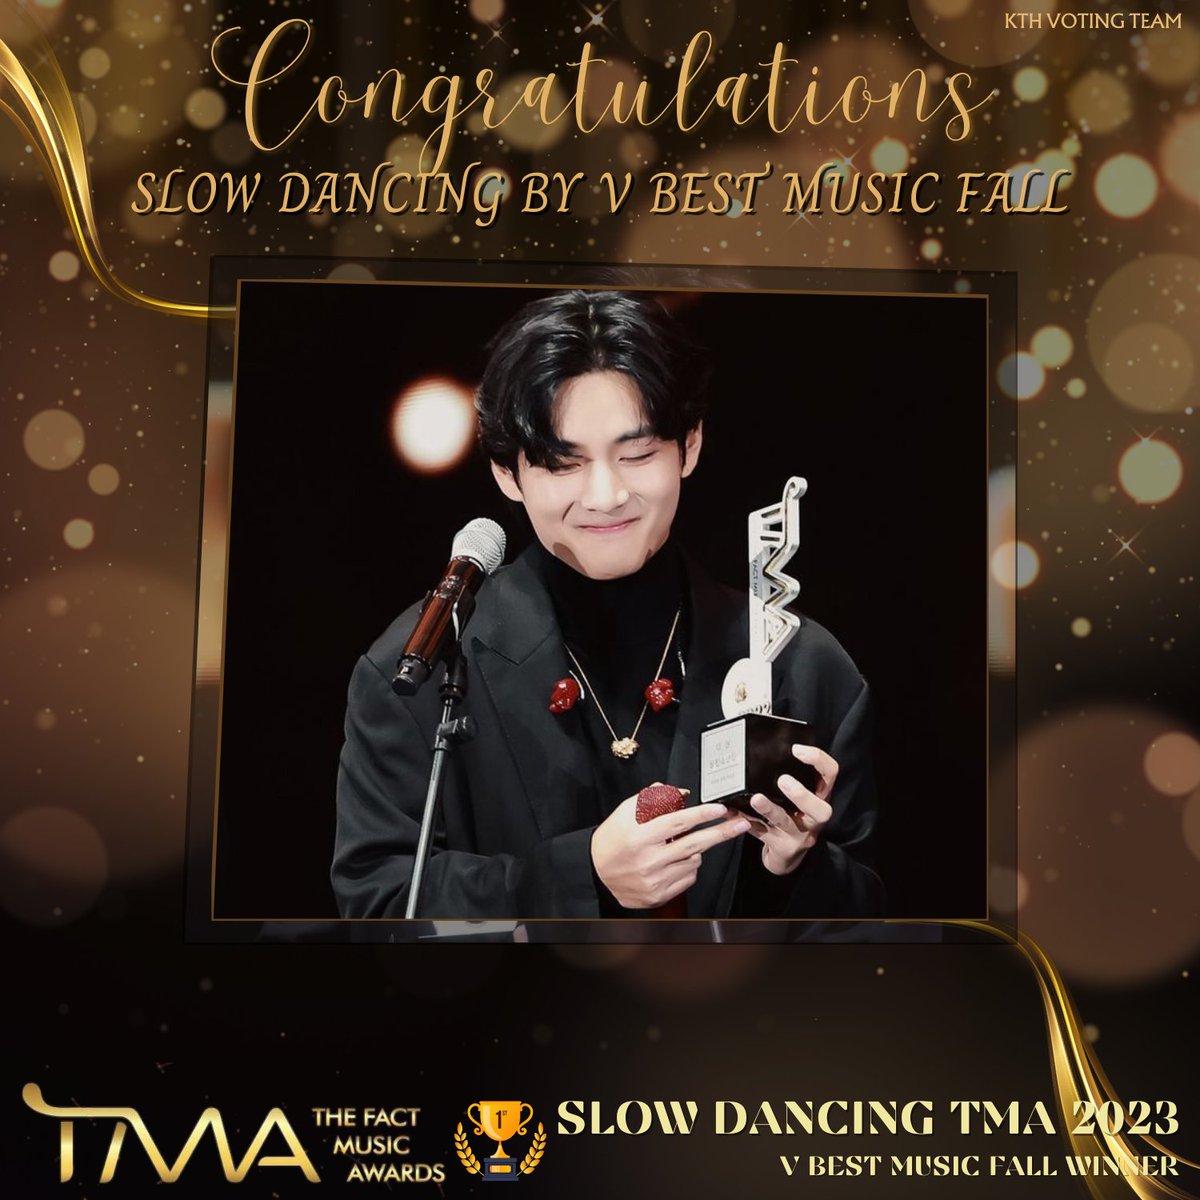 [🏆] Taehyung is the First and Only Idol Soloist to have 2 consecutive wins with the 'Best Music' category in The Fact Music Awards 🏆 - 'Slow Dancing' Best Music Fall 2023 - FRI(END)S' Best Music Spring 2024 CONGRATULATIONS TAEHYUNG!! V BEST MUSIC SPRING AWARD…